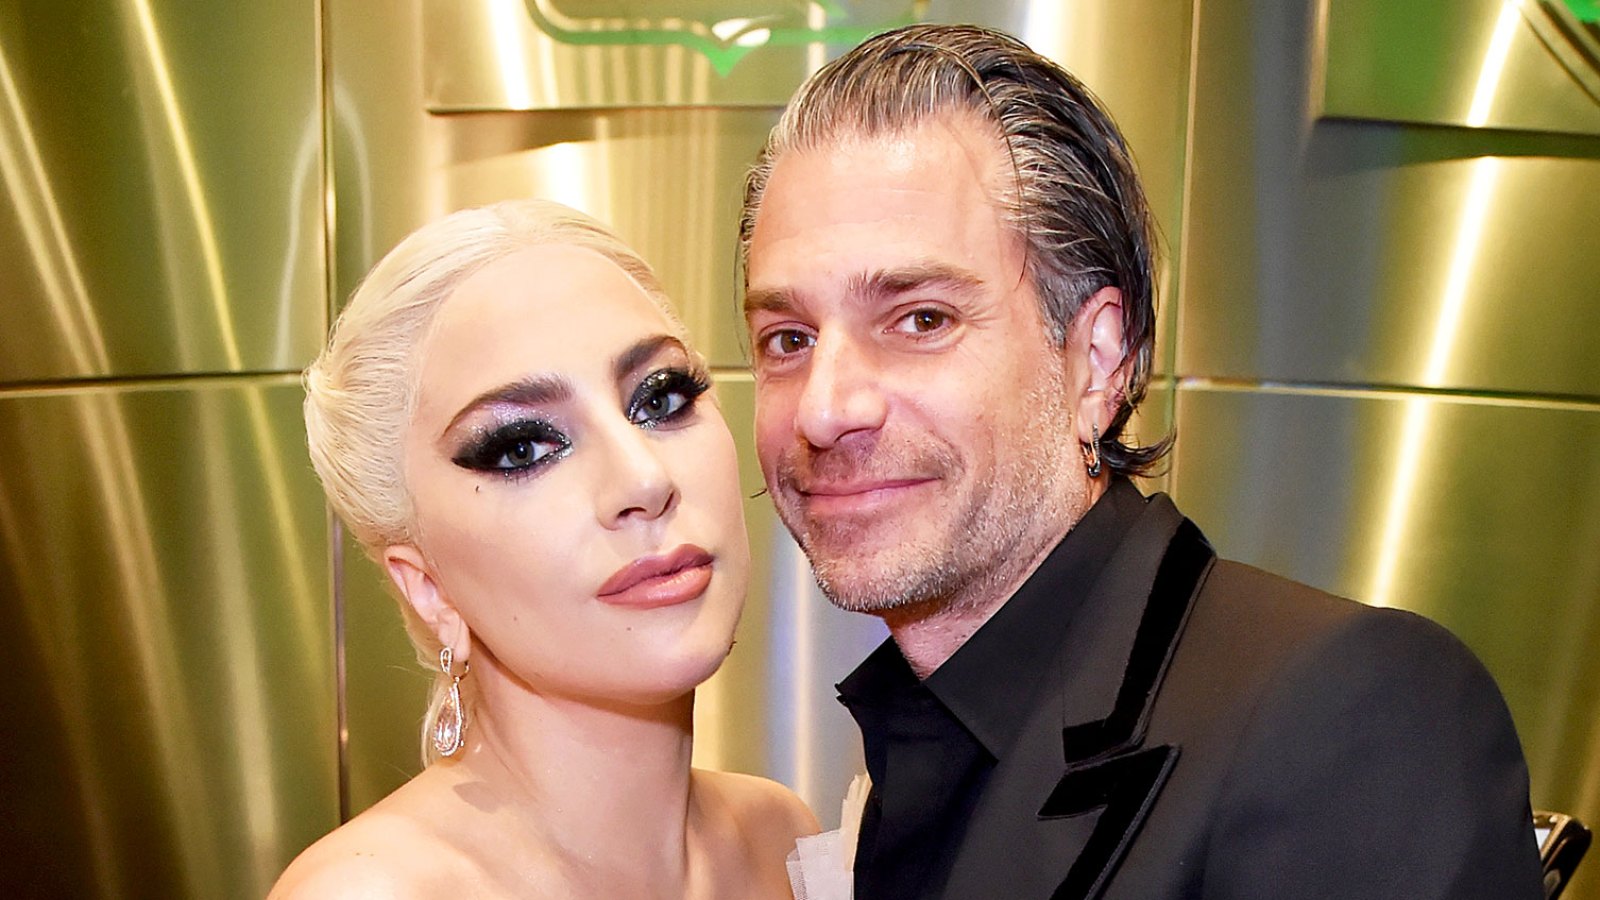 Lady Gaga and Christian Carino backstage at the 60th Annual Grammy Awards at Madison Square Garden on January 28, 2018 in New York City.